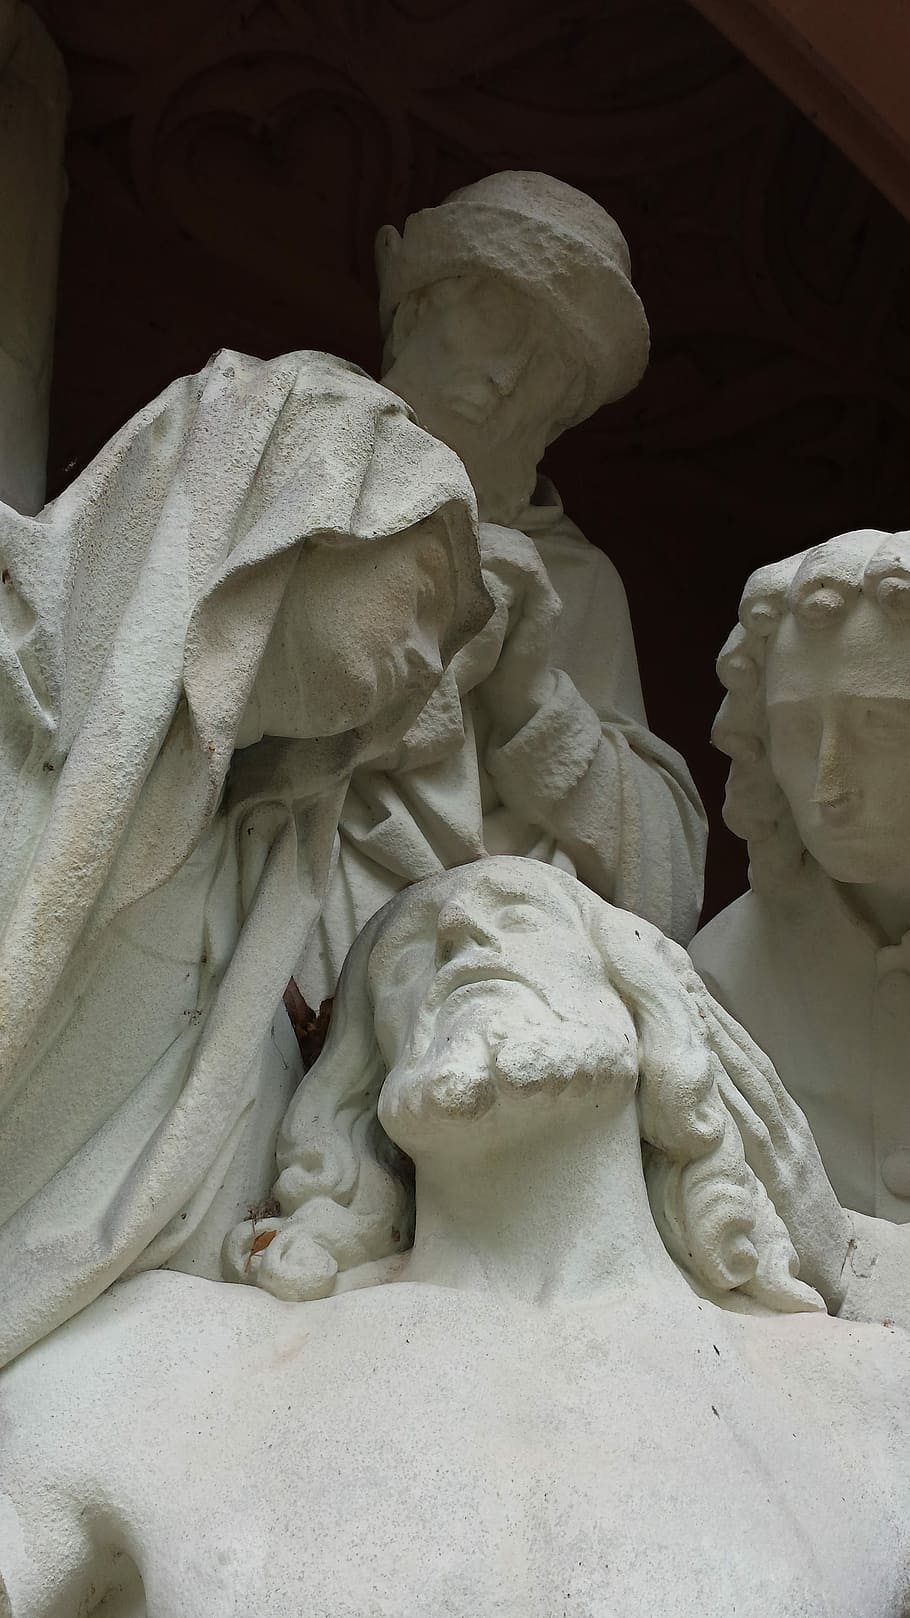 Jesus, Death, Redemption, rochusberg, statue, marble, sculpture, indoors, close-up, art and craft